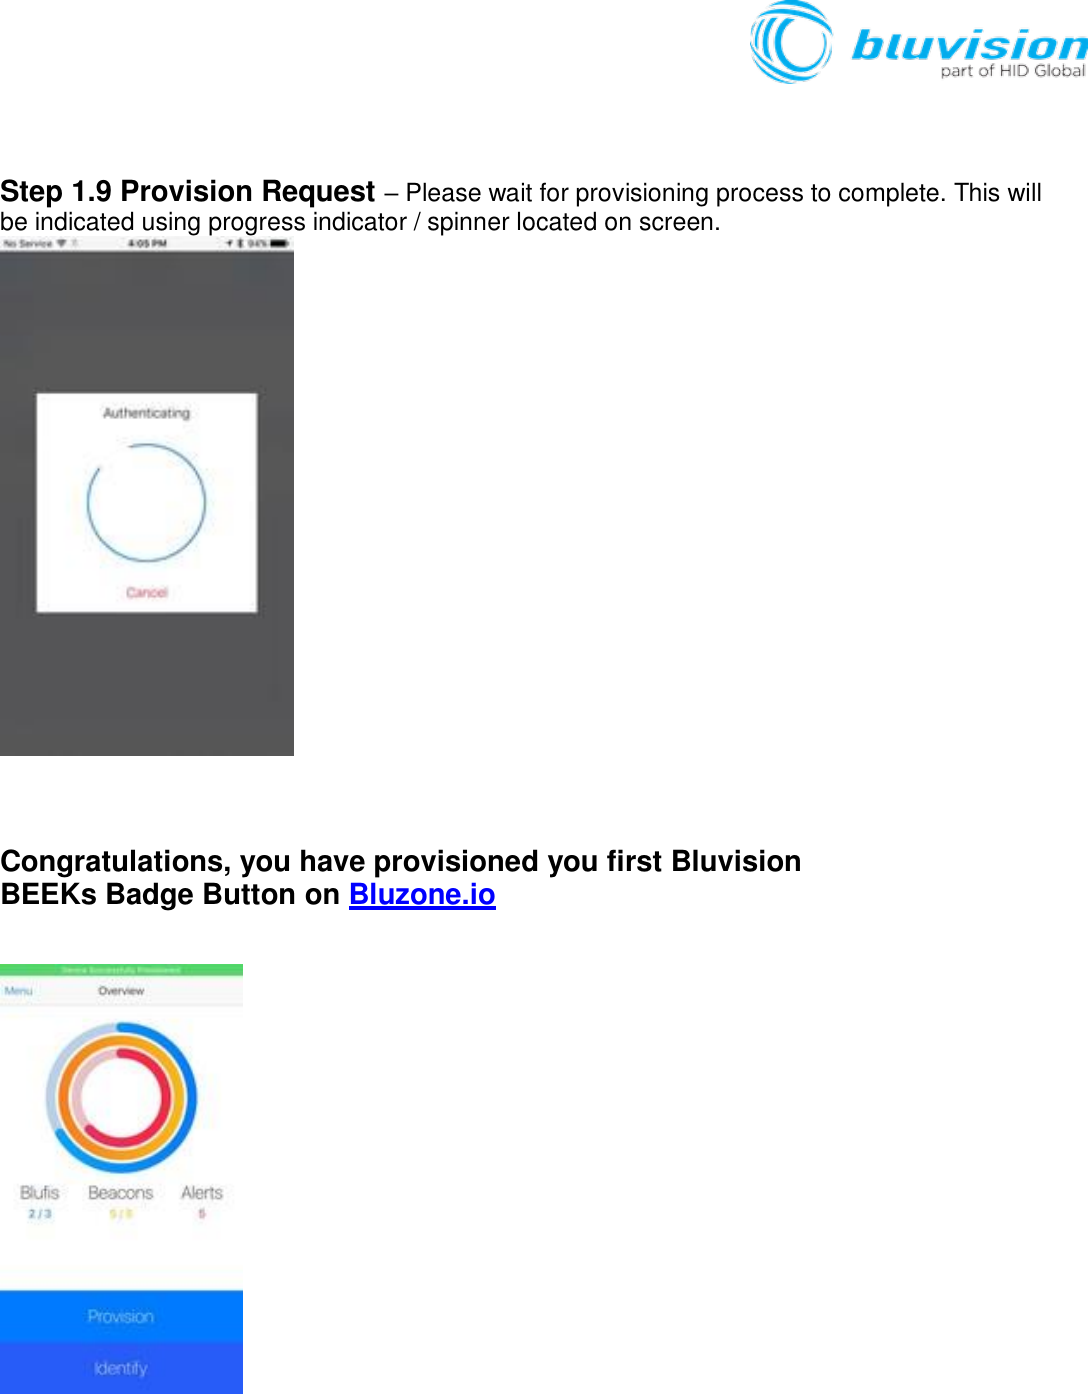     Step 1.9 Provision Request – Please wait for provisioning process to complete. This will be indicated using progress indicator / spinner located on screen.     Congratulations, you have provisioned you first Bluvision BEEKs Badge Button on Bluzone.io   